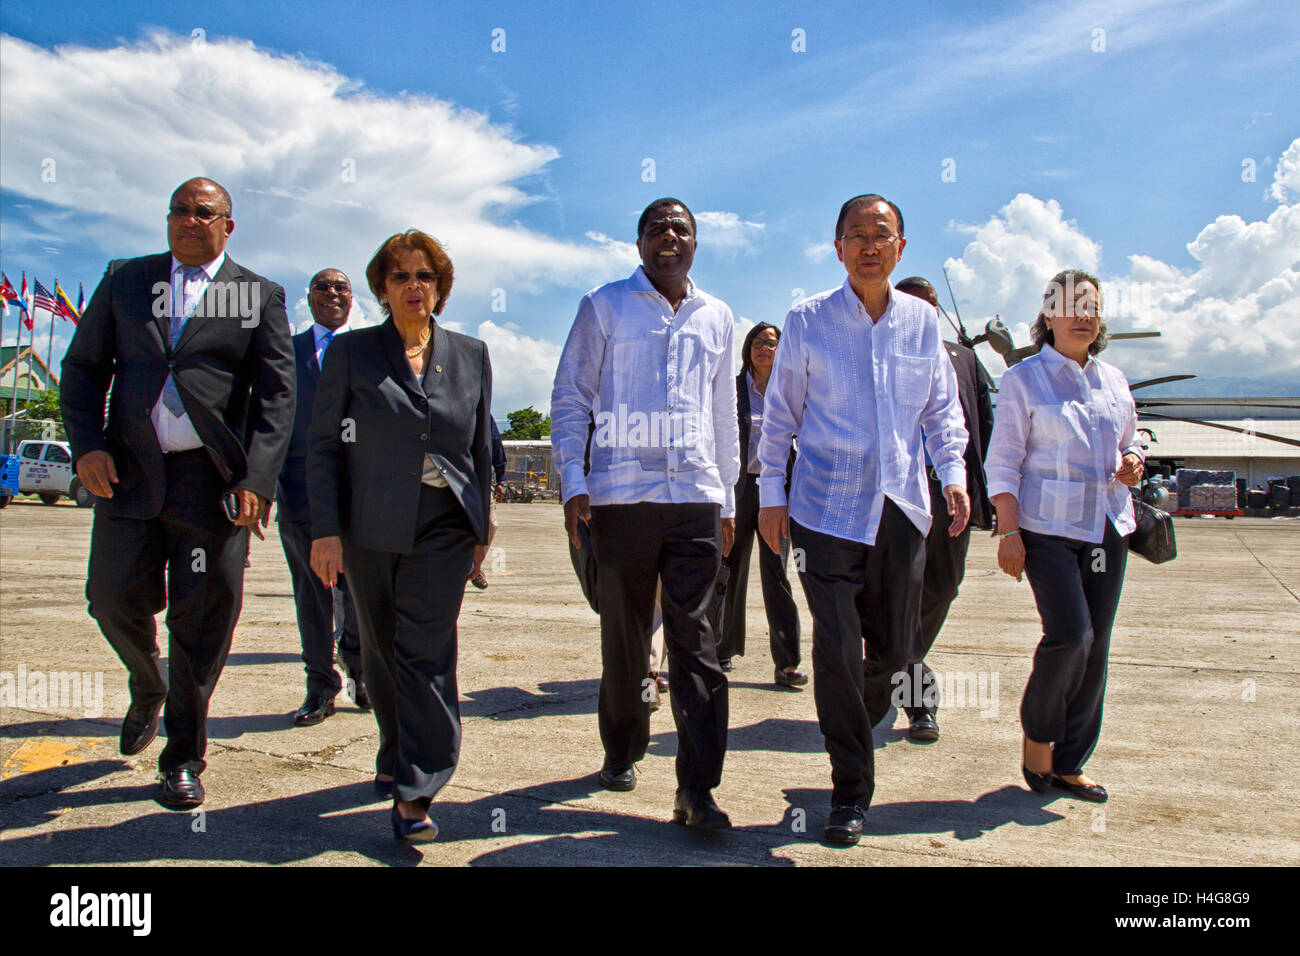 (161015) -- PORT AU PRINCE, Oct. 15, 2016 (Xinhua) -- Image provided by the United Nations Stabilization Mission in Haiti (MINUSTAH) shows UN Secretary-General Ban Ki-moon (2nd R) arriving at the Port-au-Prince International Airport, accompanied by Haitian Prime Minister Enex Jean-Charles (C) and UN secretary-general's special representative in Haiti and head of MINUSTAH Sandra Honore (2nd L), in Port-au-Prince, Haiti, on Oct. 15, 2016. Ban arrived on Saturday in Haiti to make a tour to the areas hardest hit by Hurricane Matthew and met with government officials and humanitarian organizations Stock Photo